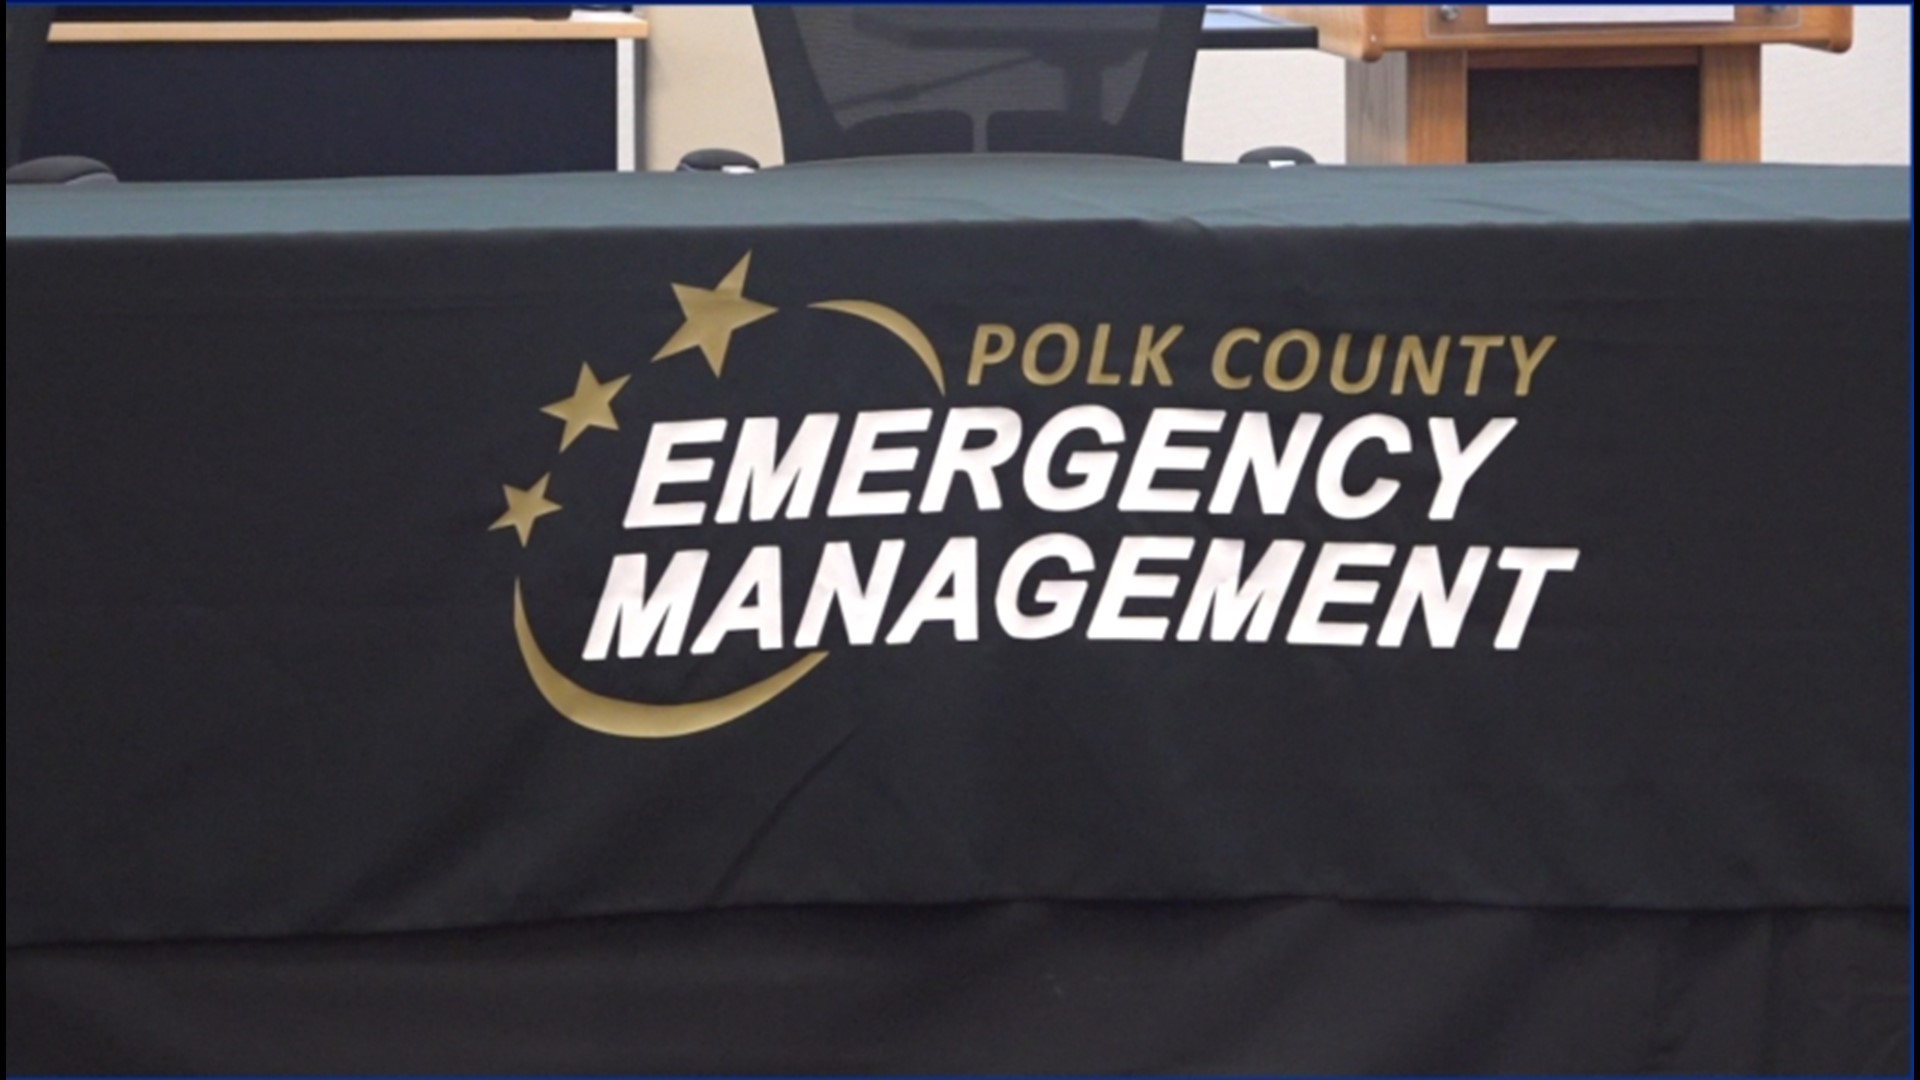 Polk County Emergency Management says it is important to be alert and have things prepared for all scenarios.